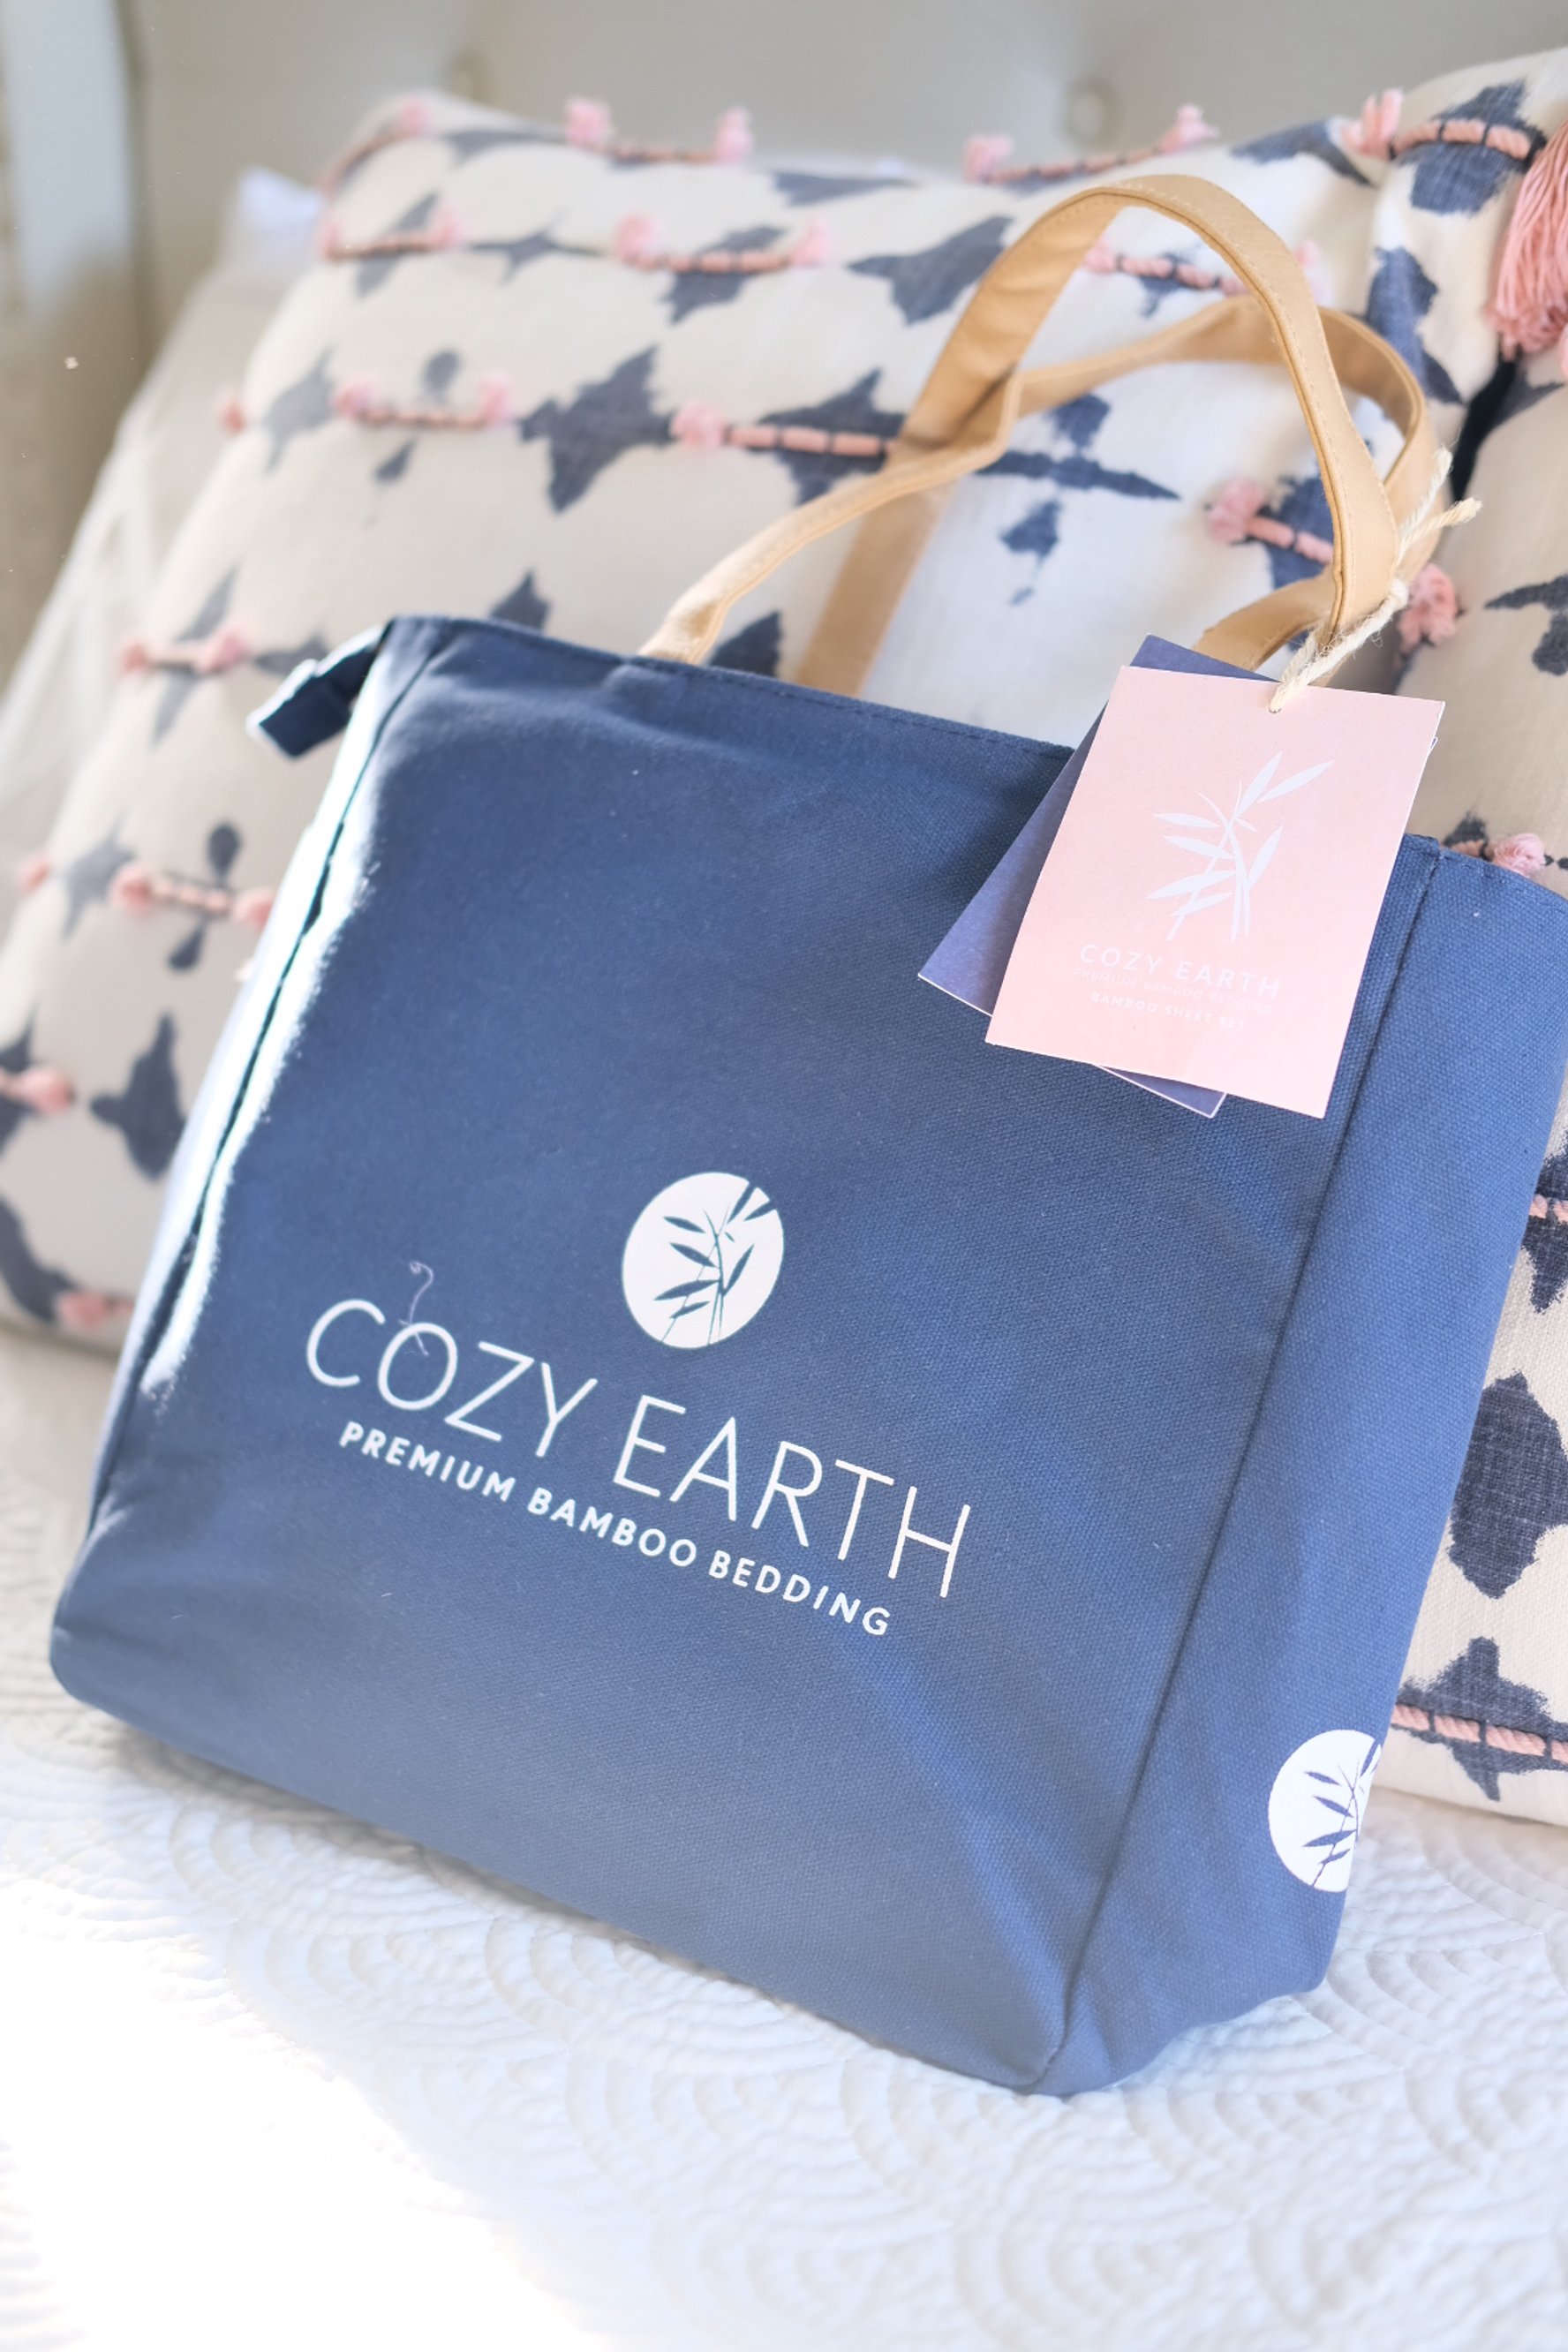 If you are looking for Cozy Earth bedding reviews and Cozy Earth sheets reviews, then look no further. I have everything you need to know about Cozy Earth bedding, along with a Cozy Earth discount code that will get you a whopping 45% off all Cozy Ea